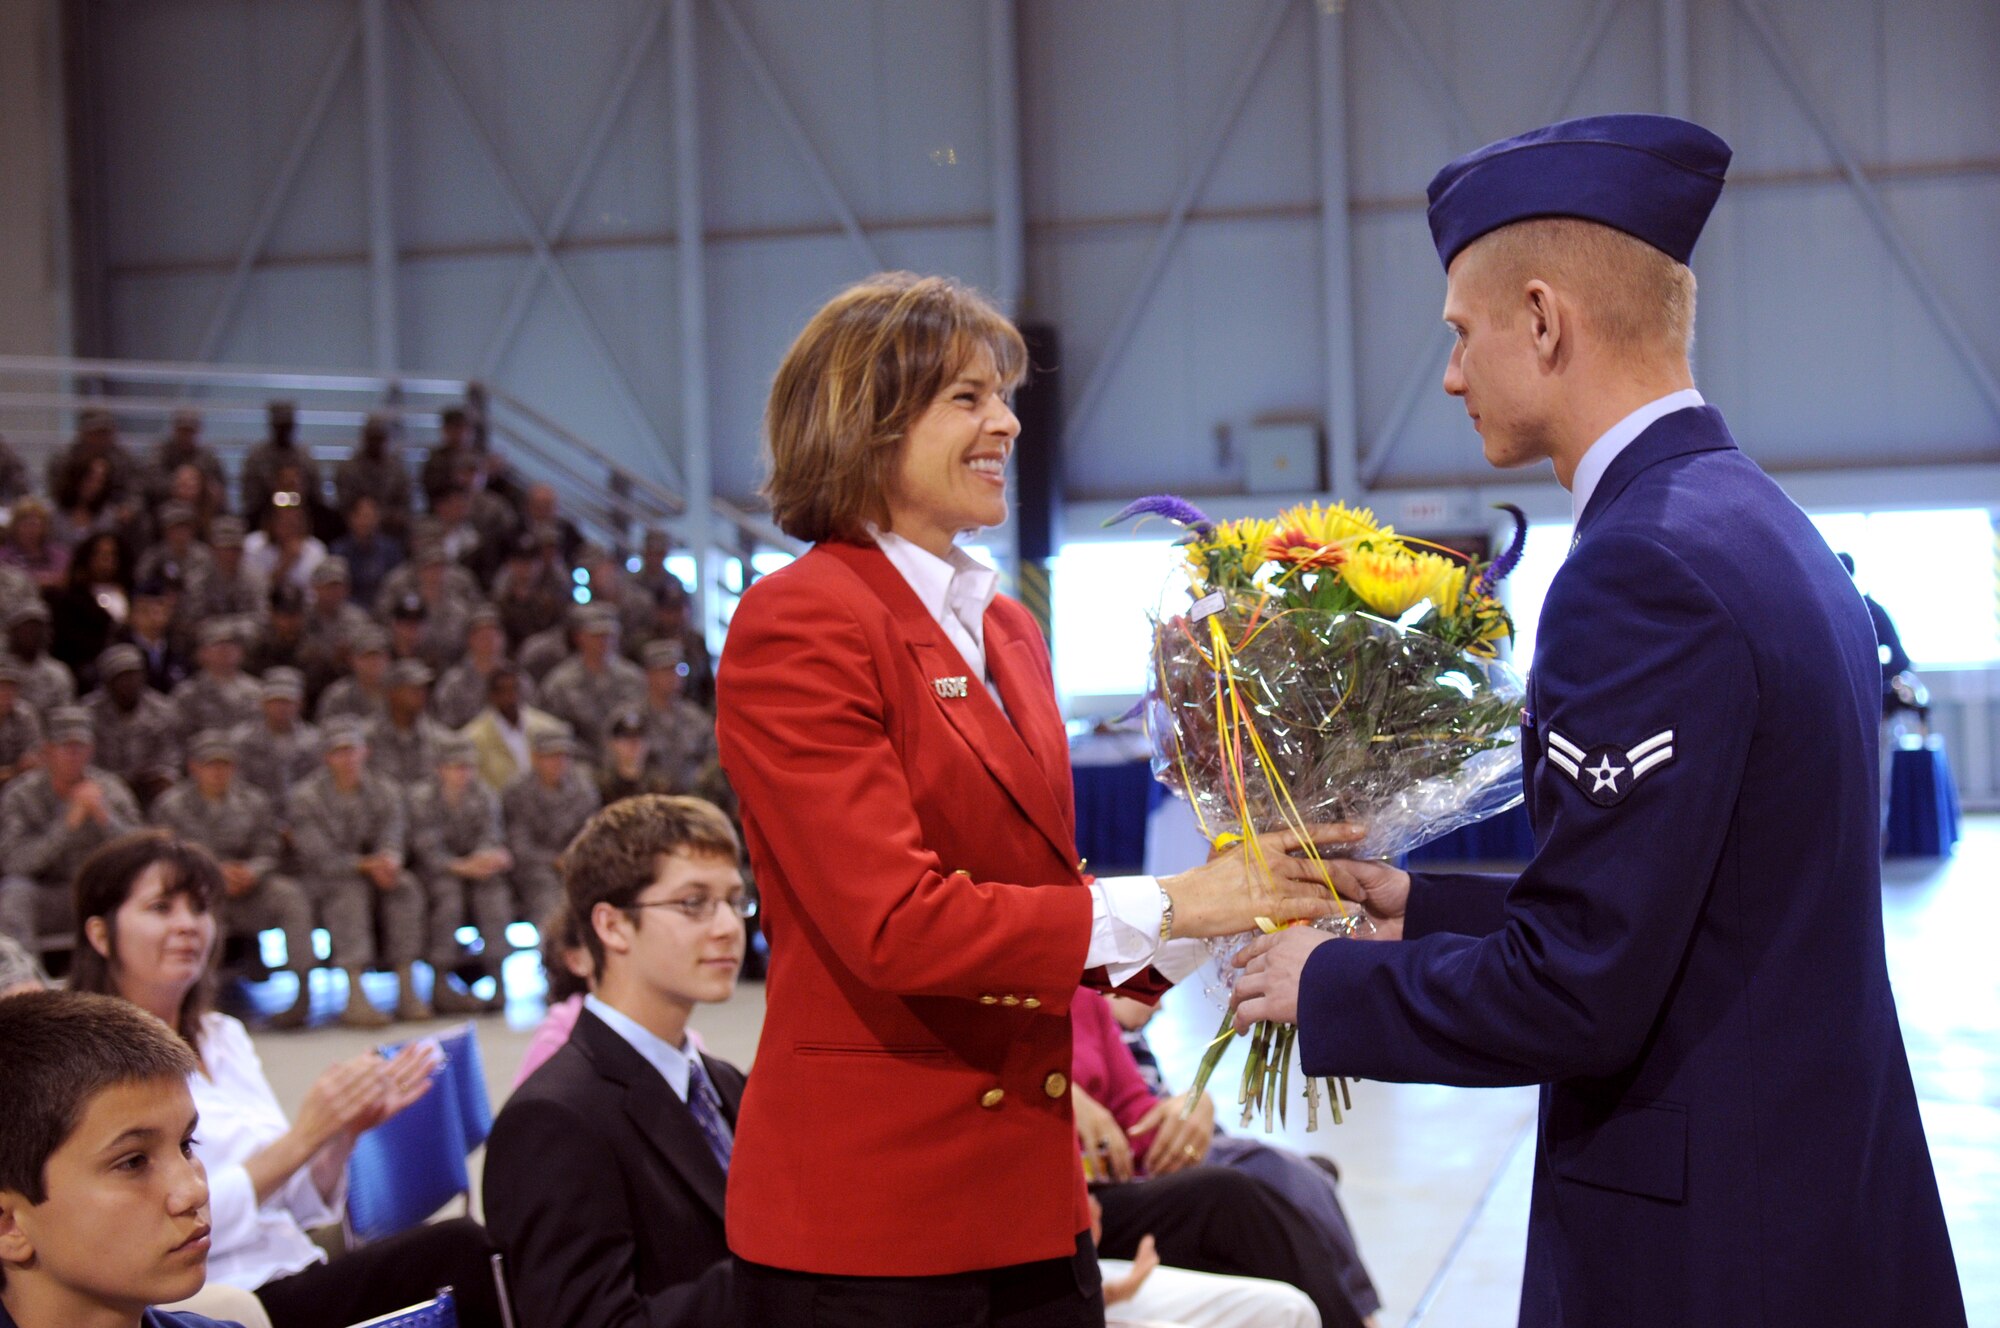 435th Air Base Wing commander’s wife, Stephania Gould, receives flower at the change of command ceremony in Hangar one, Ramstein Air Base, Germany, June 11, 2009.  (U.S. Air Force photo by Staff Sgt. Levi Riendeau)